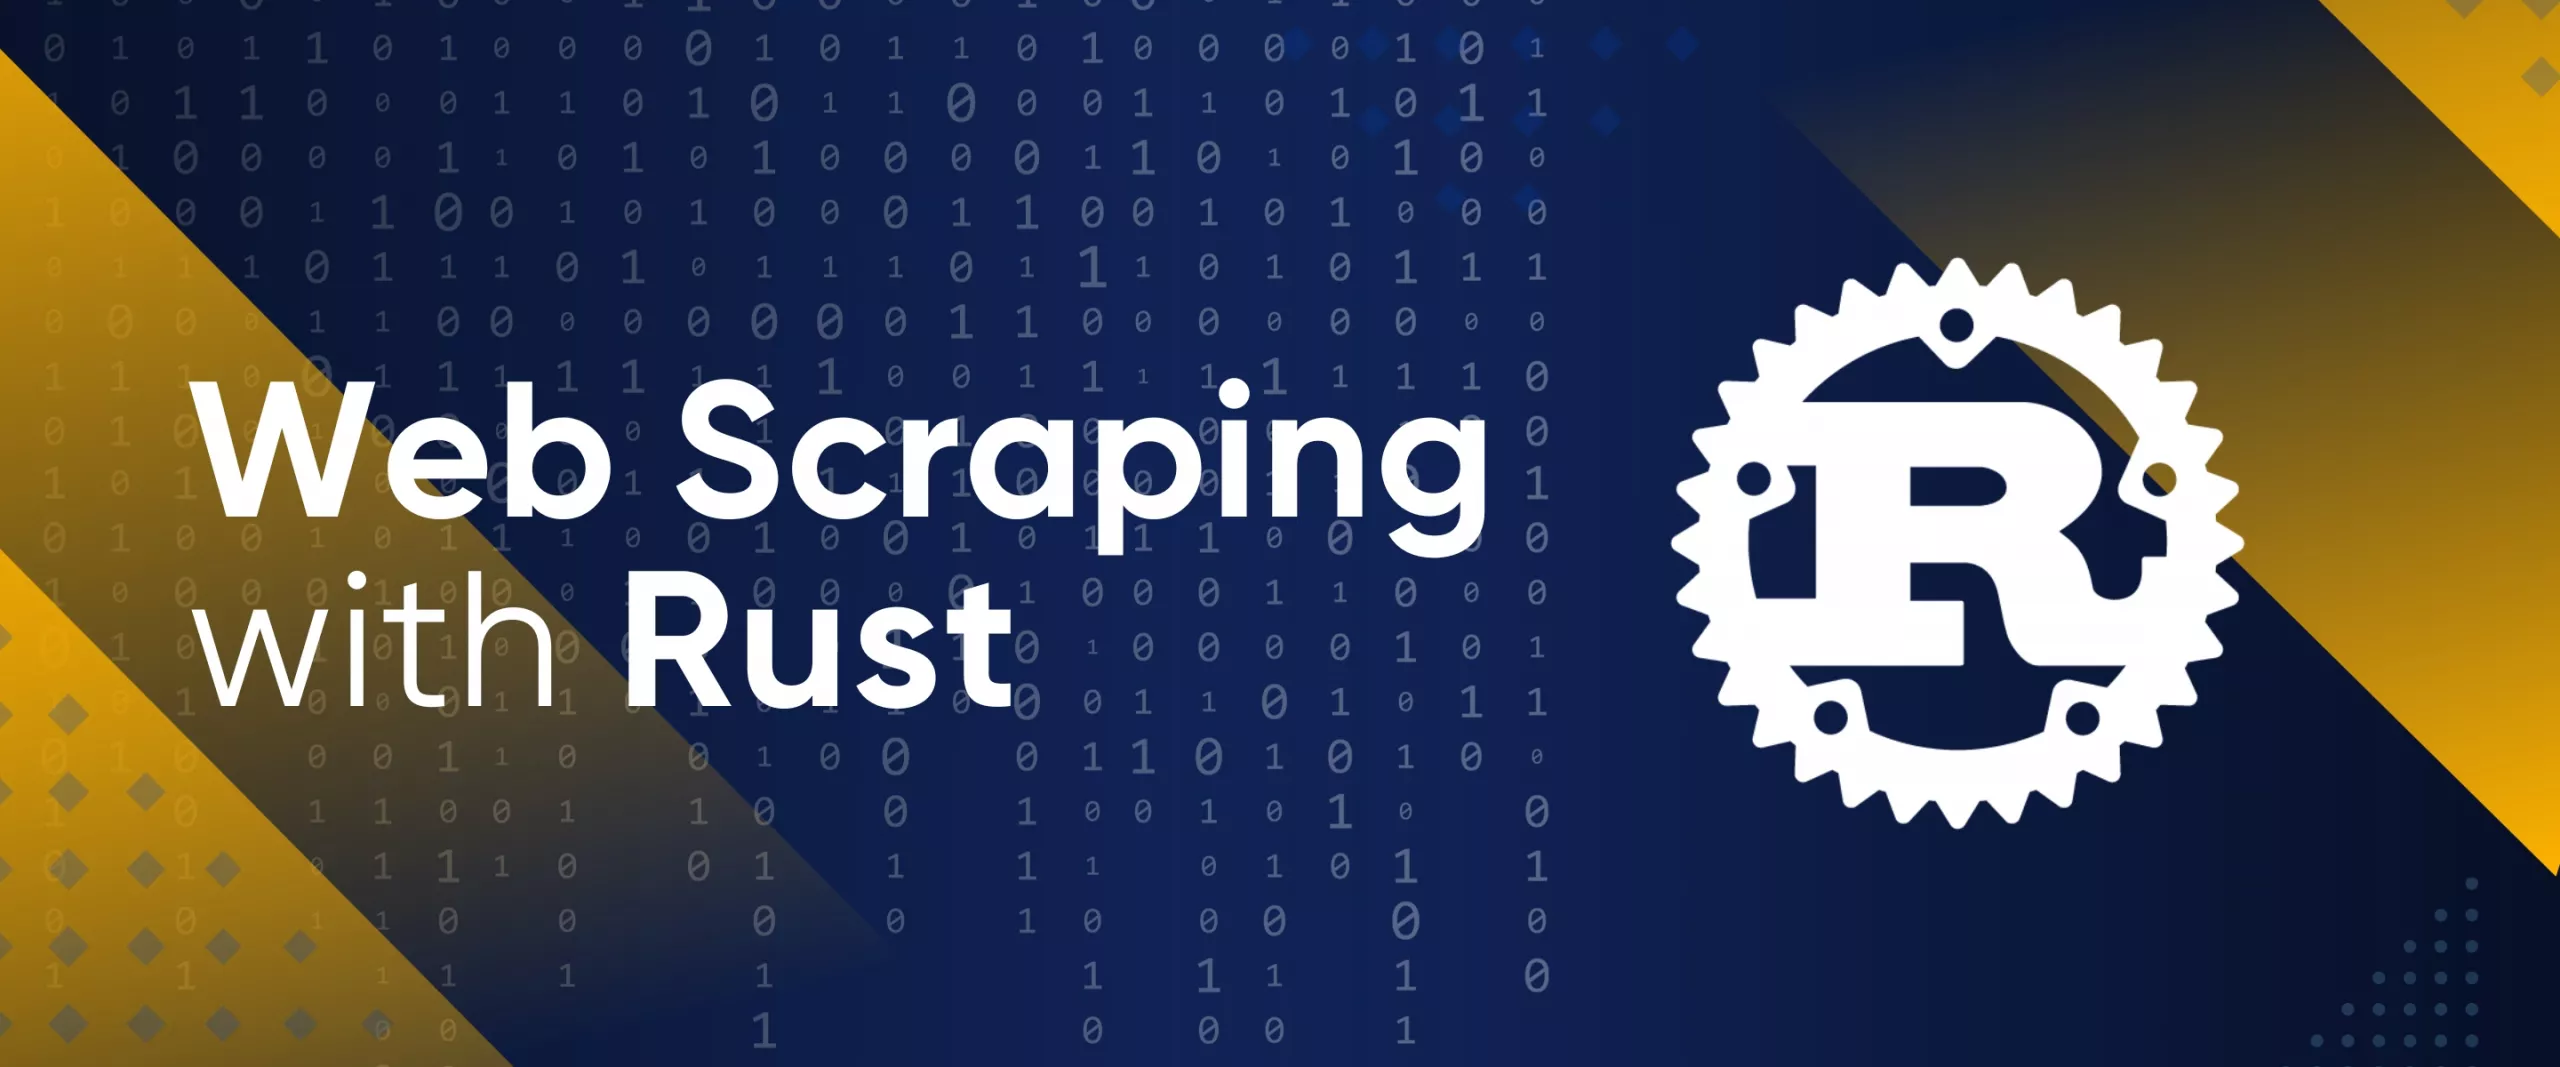 Web Scraping with Rust: A Complete Guide for Beginners